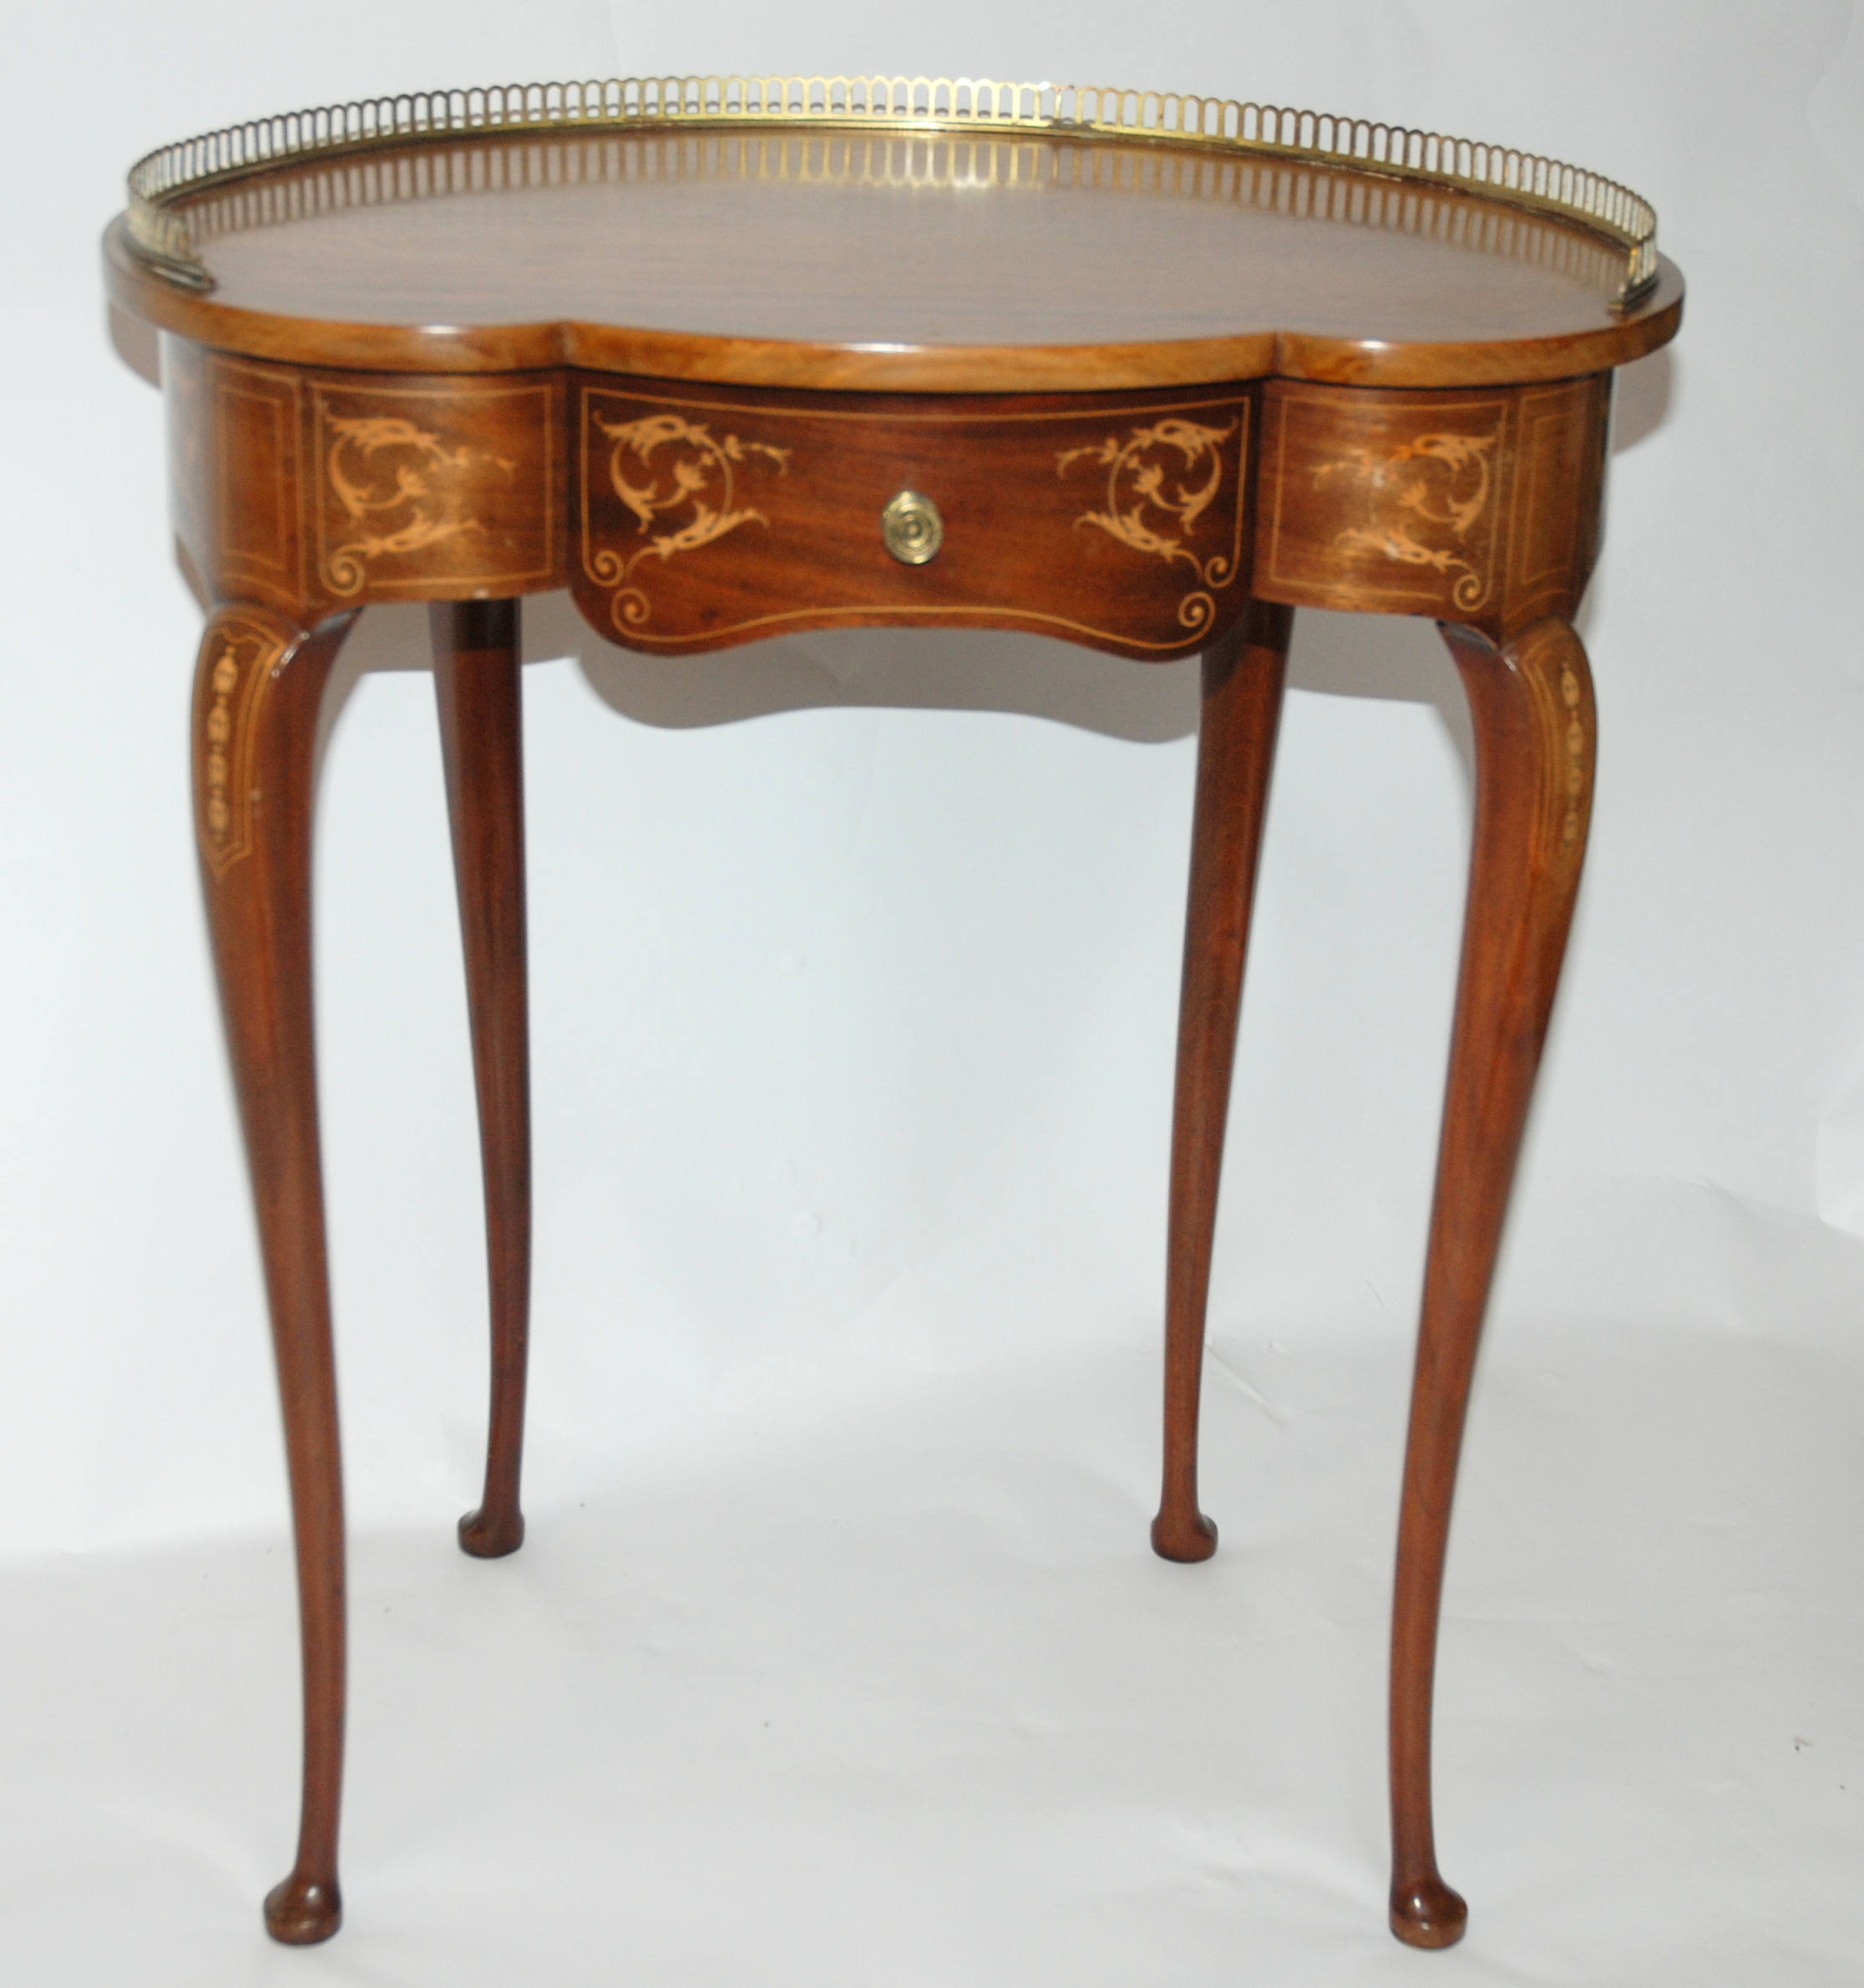 An Edwardian rosewood and inlaid kidney shaped ladies writing desk with three quarter brass - Image 2 of 4